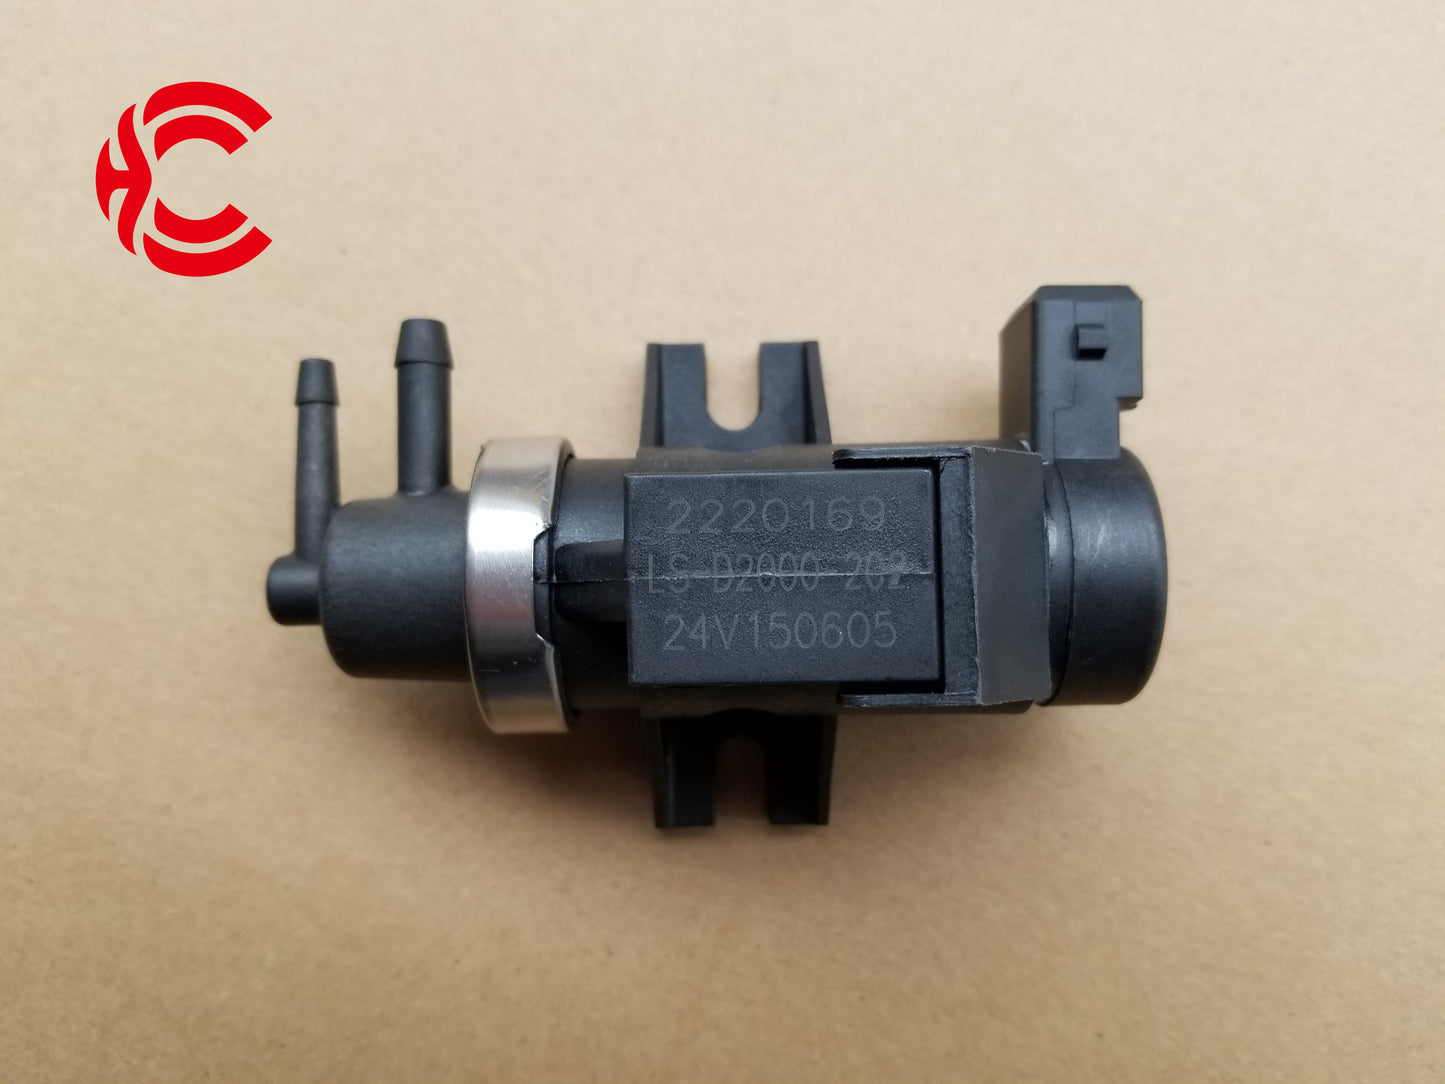 OEM: LS-D2000-202 24VMaterial: ABSColor: blackOrigin: Made in ChinaWeight: 150gPacking List: 1* Turbocharger VNT Solenoid Valve More ServiceWe can provide OEM Manufacturing serviceWe can Be your one-step solution for Auto PartsWe can provide technical scheme for you Feel Free to Contact Us, We will get back to you as soon as possible.